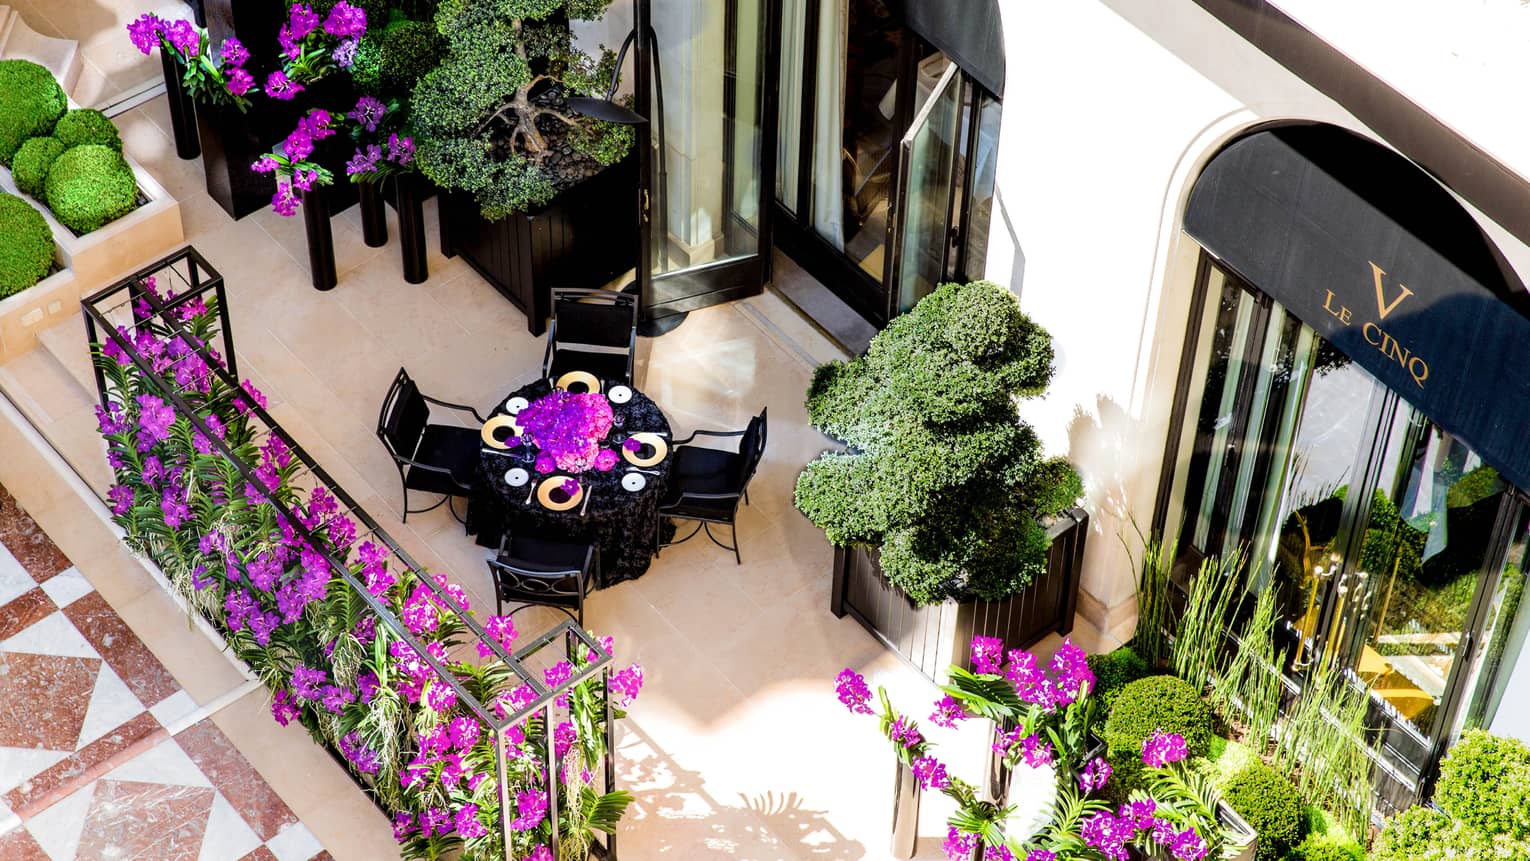 Aerial view of dining table on street-side patio, purple flowers, shrubs